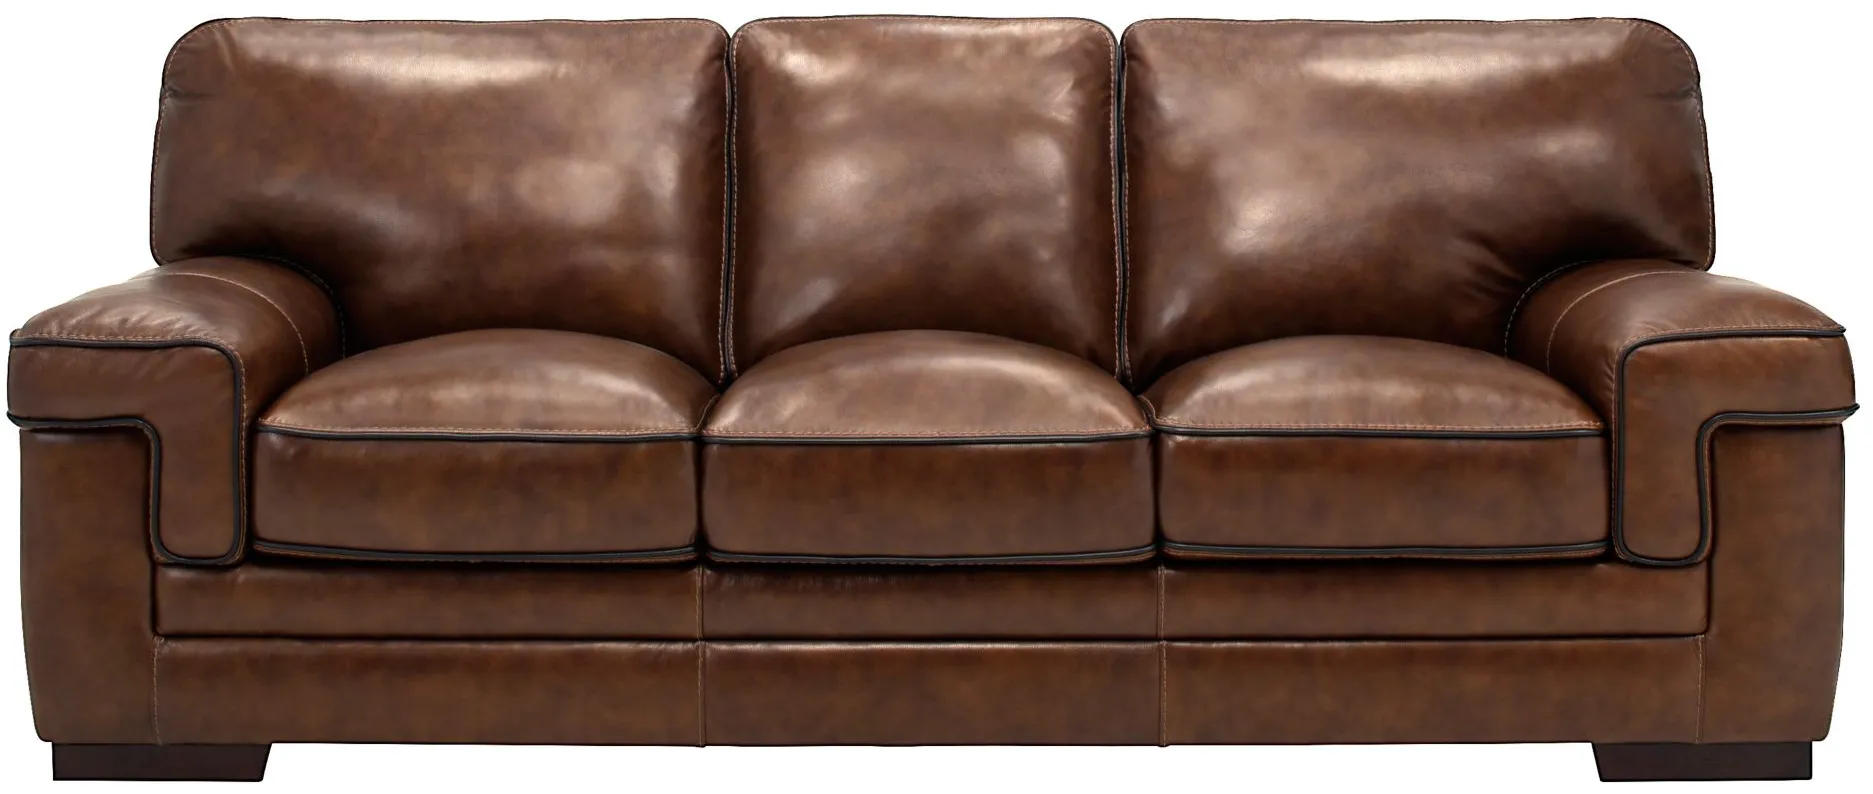 Colton Leather Sofa in Brown by Bellanest